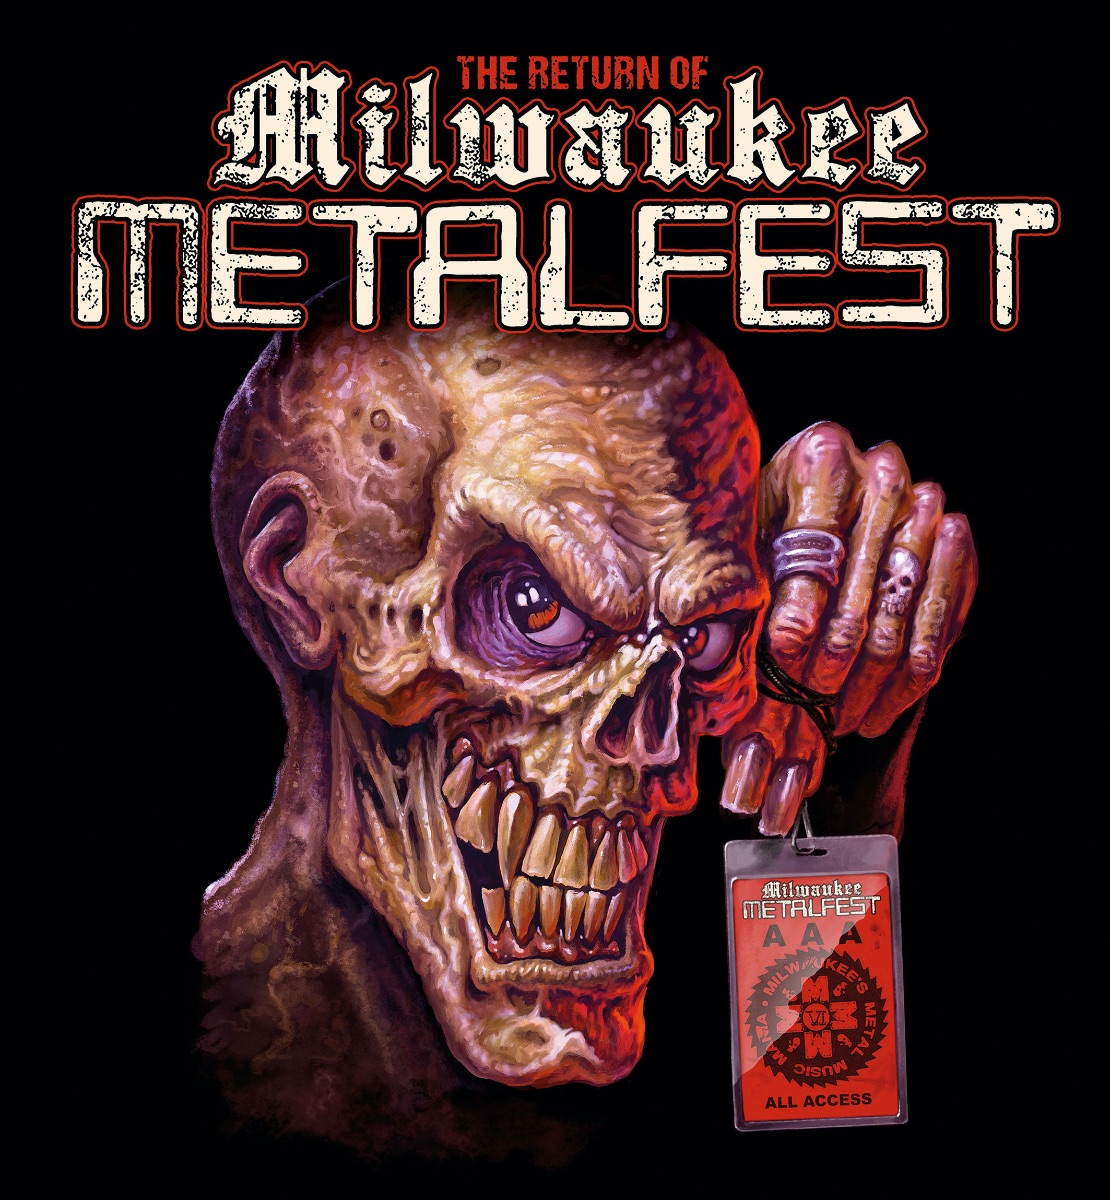 MILWAUKEE METAL FEST 2023 ANNOUNCES DATES + LINEUP!  EVENT SET FOR MAY 26, 27, & 28   LAMB OF GOD, ANTHRAX, + MORE TO APPEAR